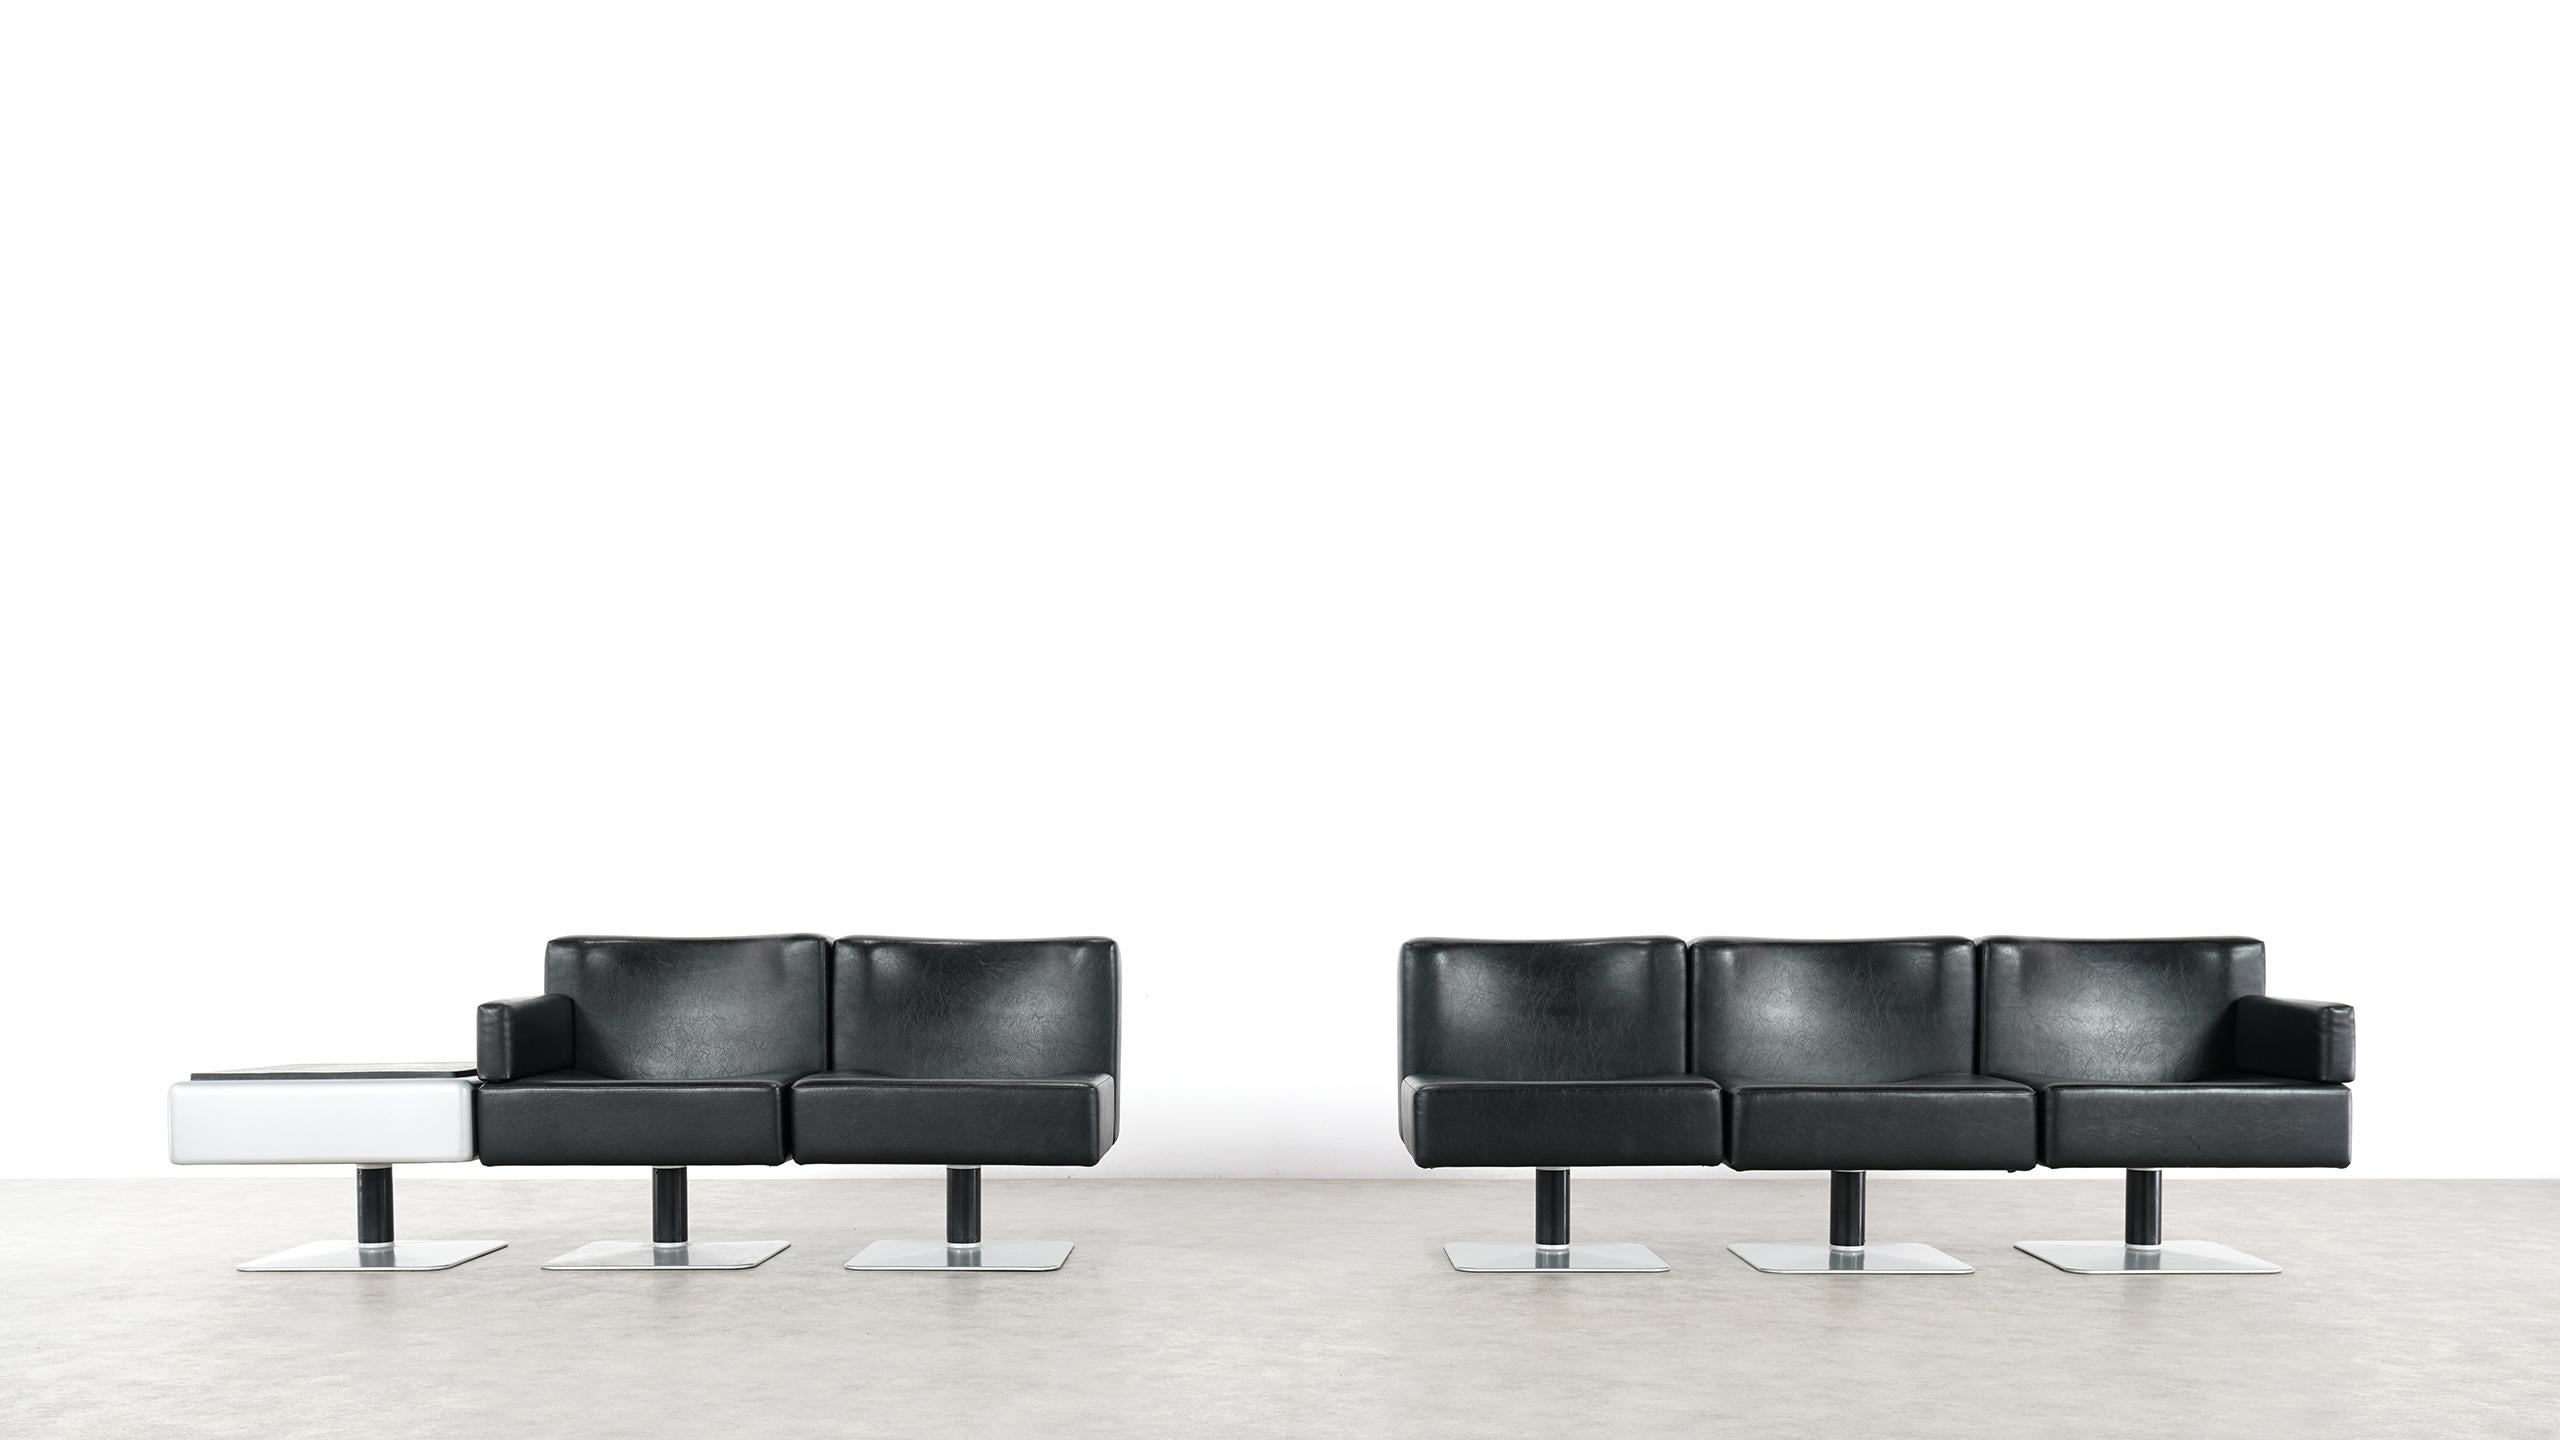 Late 20th Century Modular Lounge Sofa or Chair or Table Set by Herbert Hirche 1974 Mauser, Germany